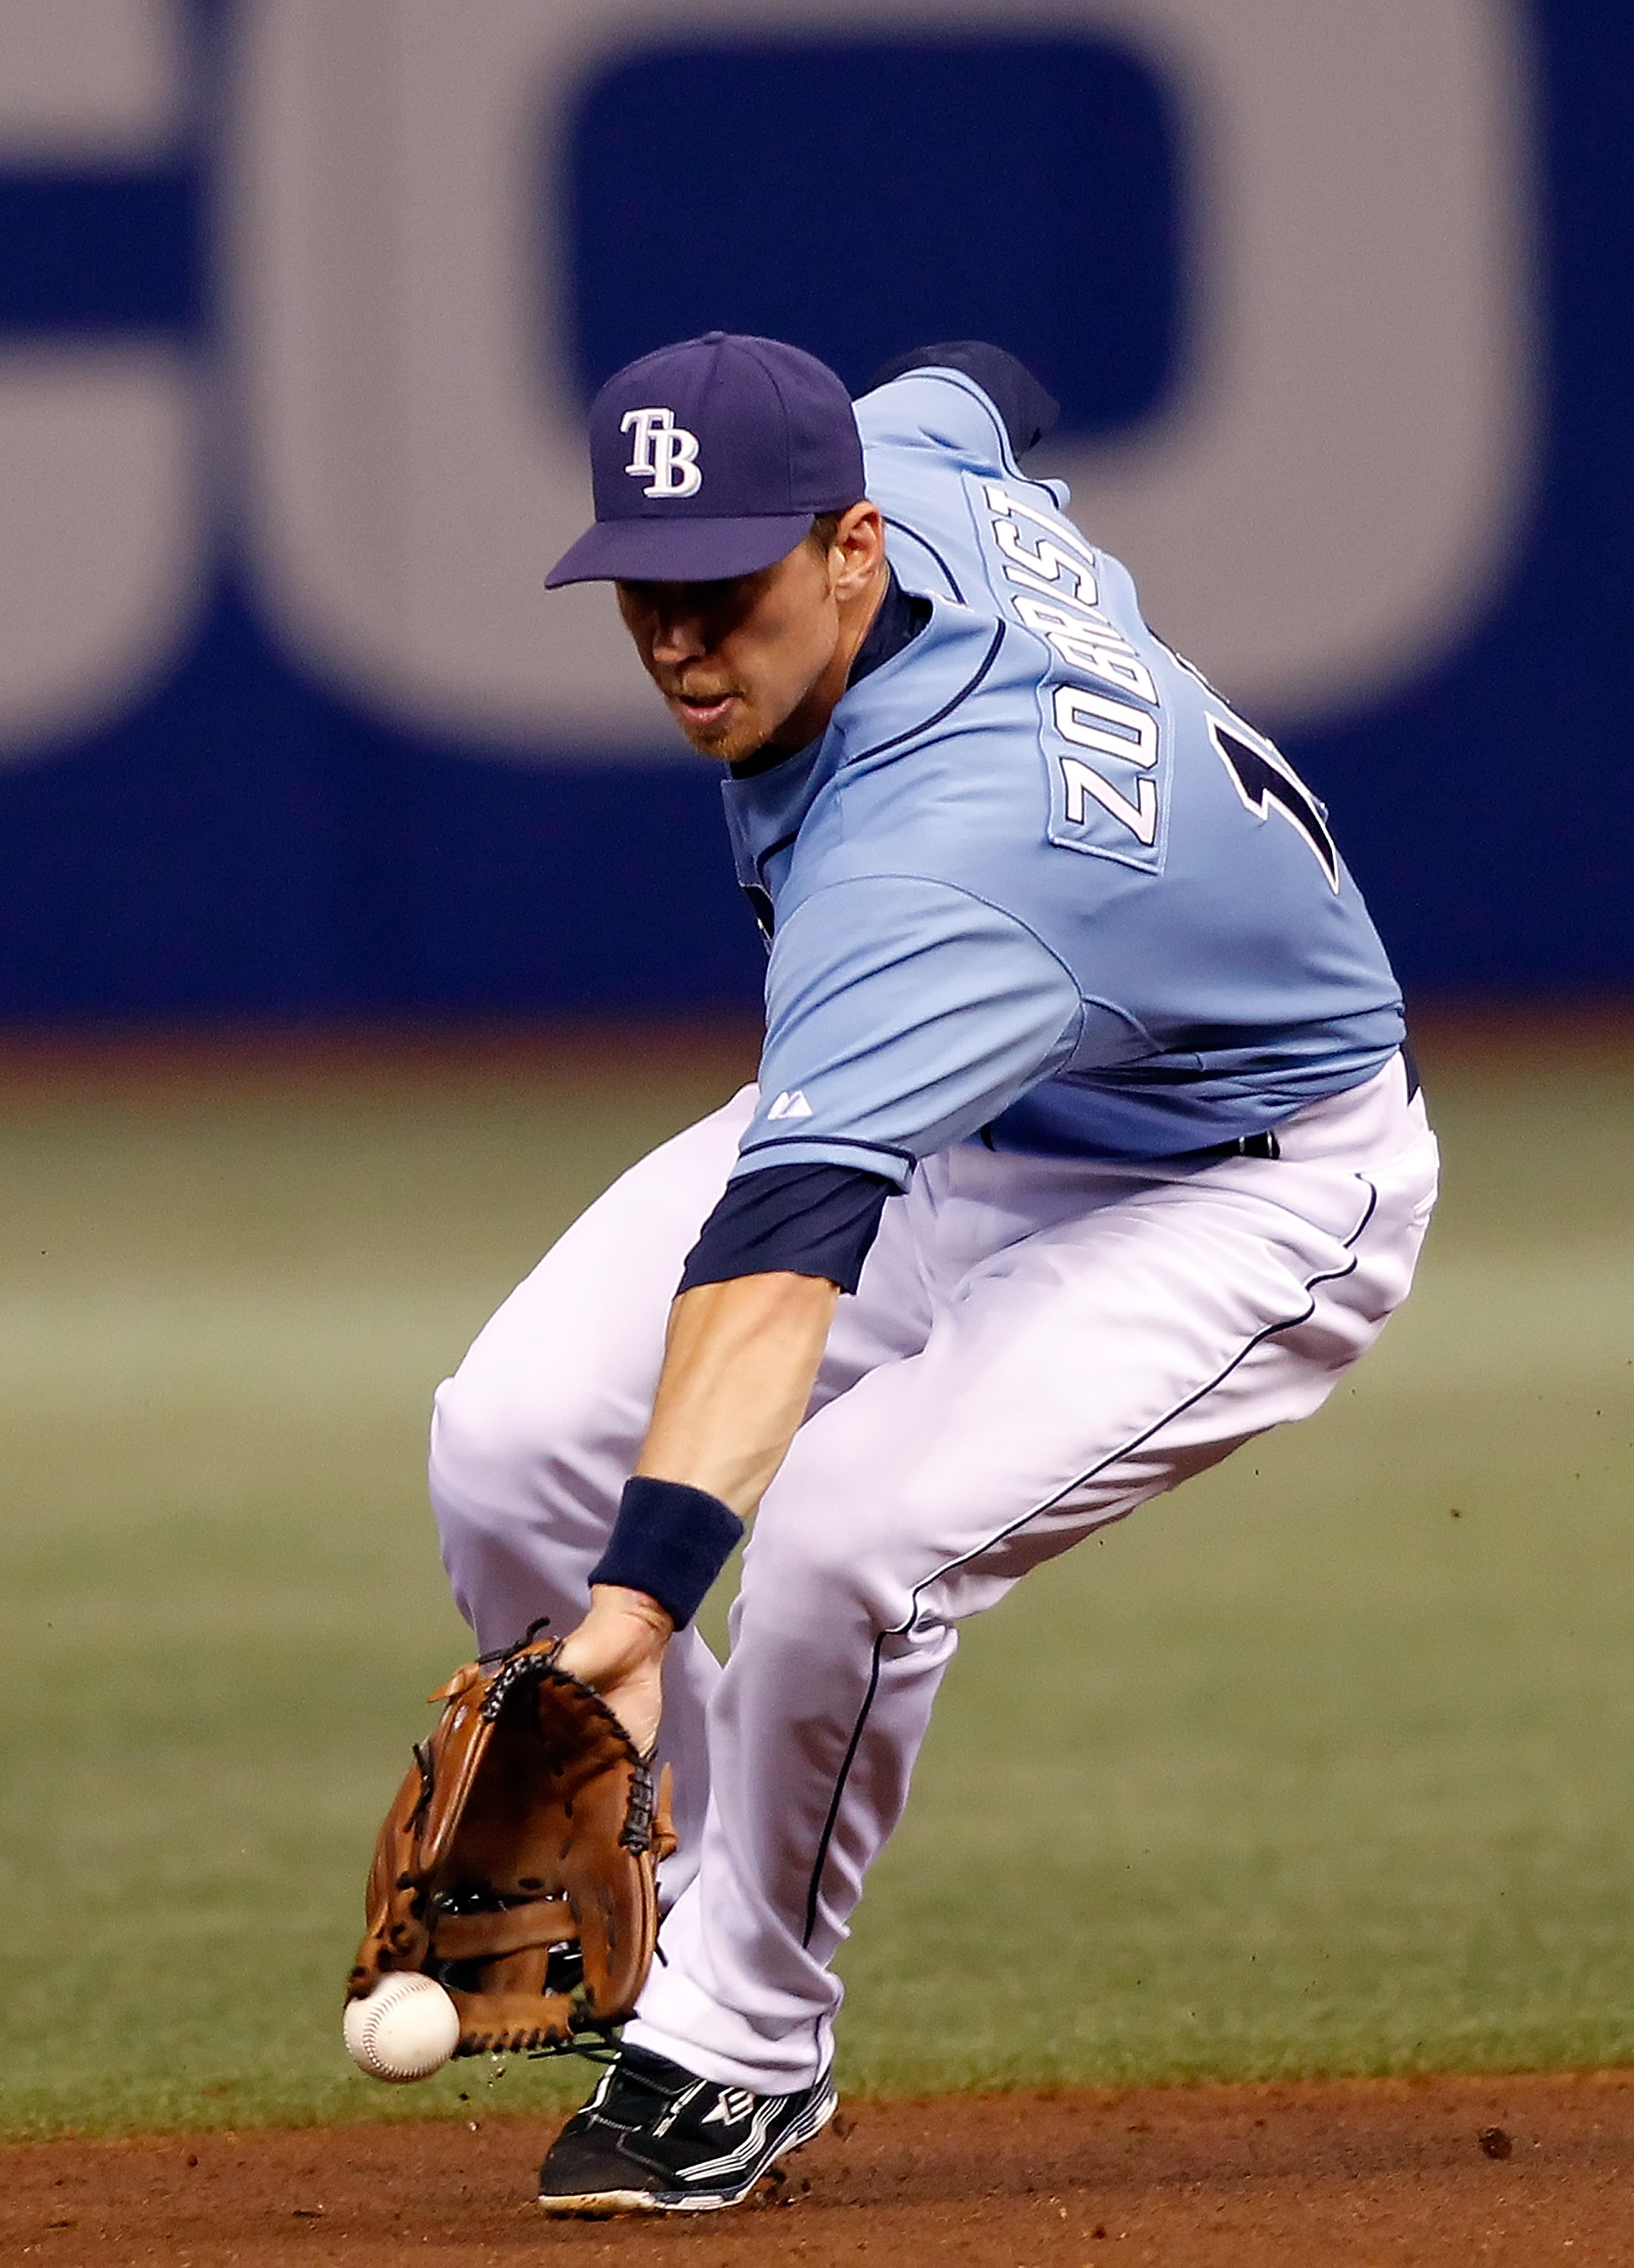 ST. PETERSBURG - AUGUST 29:  Infielder Ben Zobrist #18 of the Tampa Bay Rays cannot come up with this ground ball against the Boston Red Sox during the game at Tropicana Field on August 29, 2010 in St. Petersburg, Florida.  (Photo by J. Meric/Getty Images